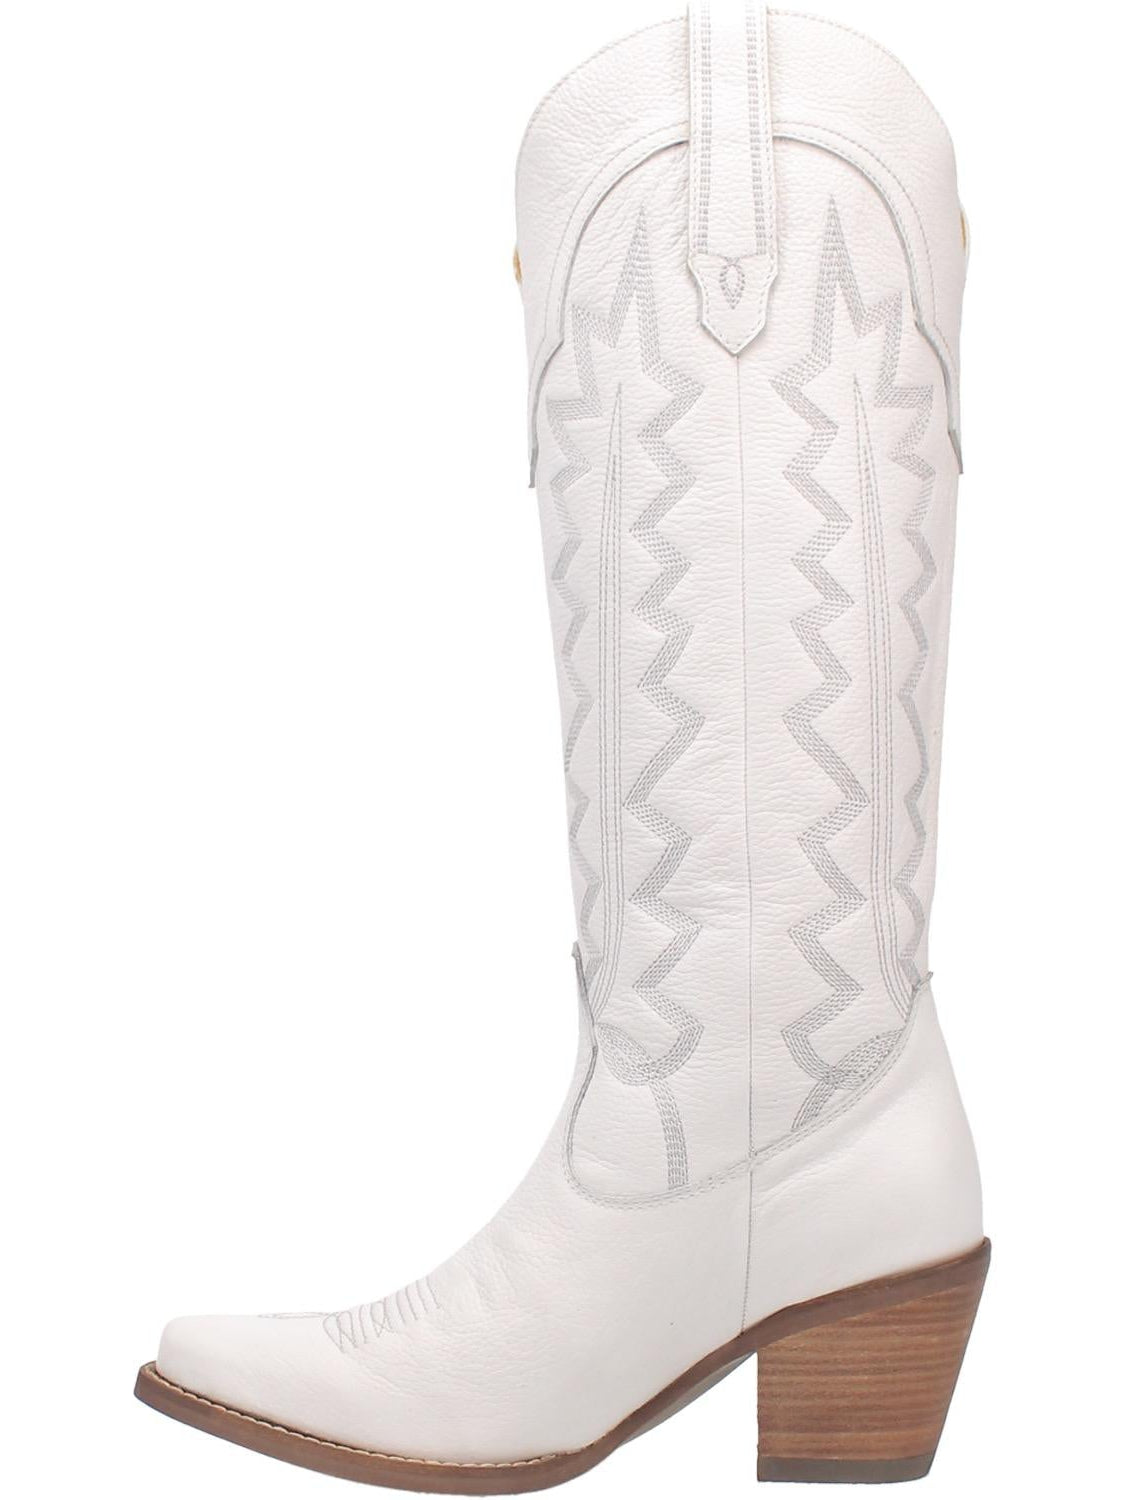 High Cotton Boot by Dingo from Dan Post - White